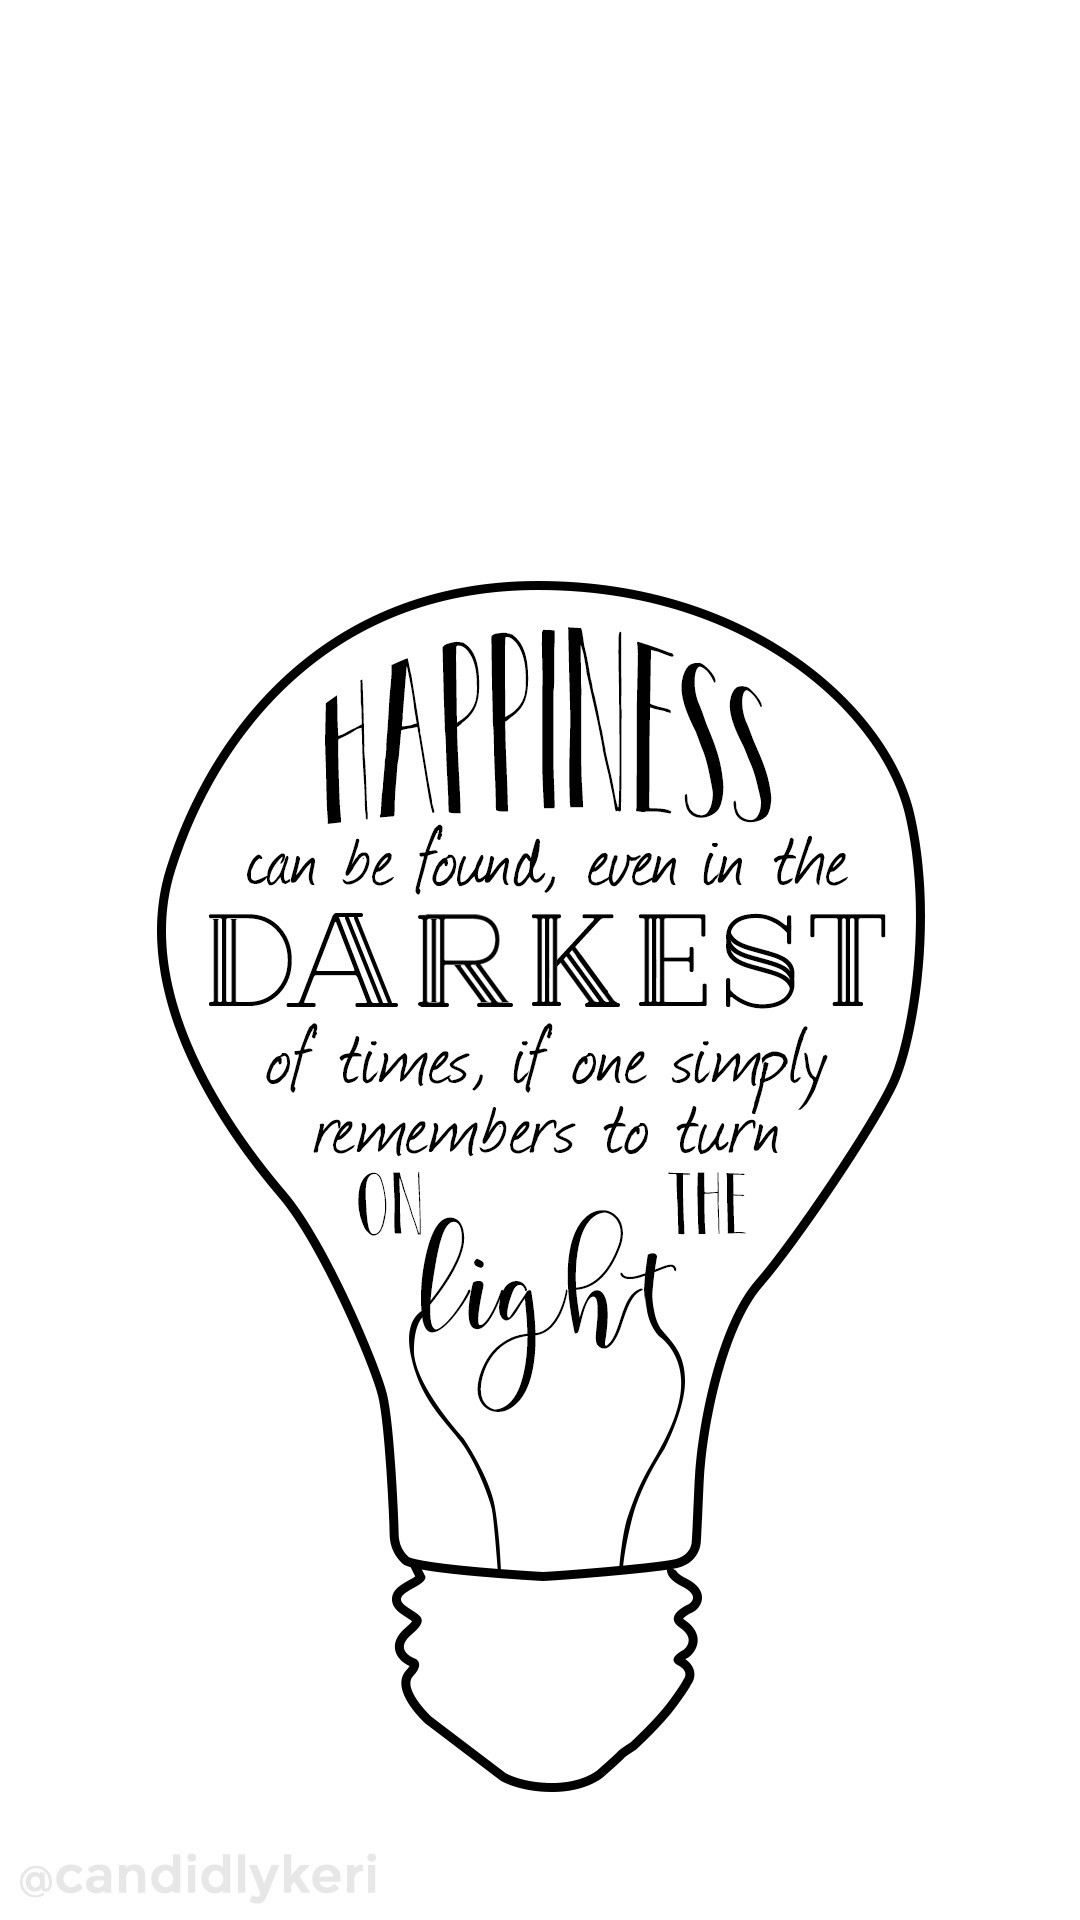 harry potter quote iphone 5 wallpaper